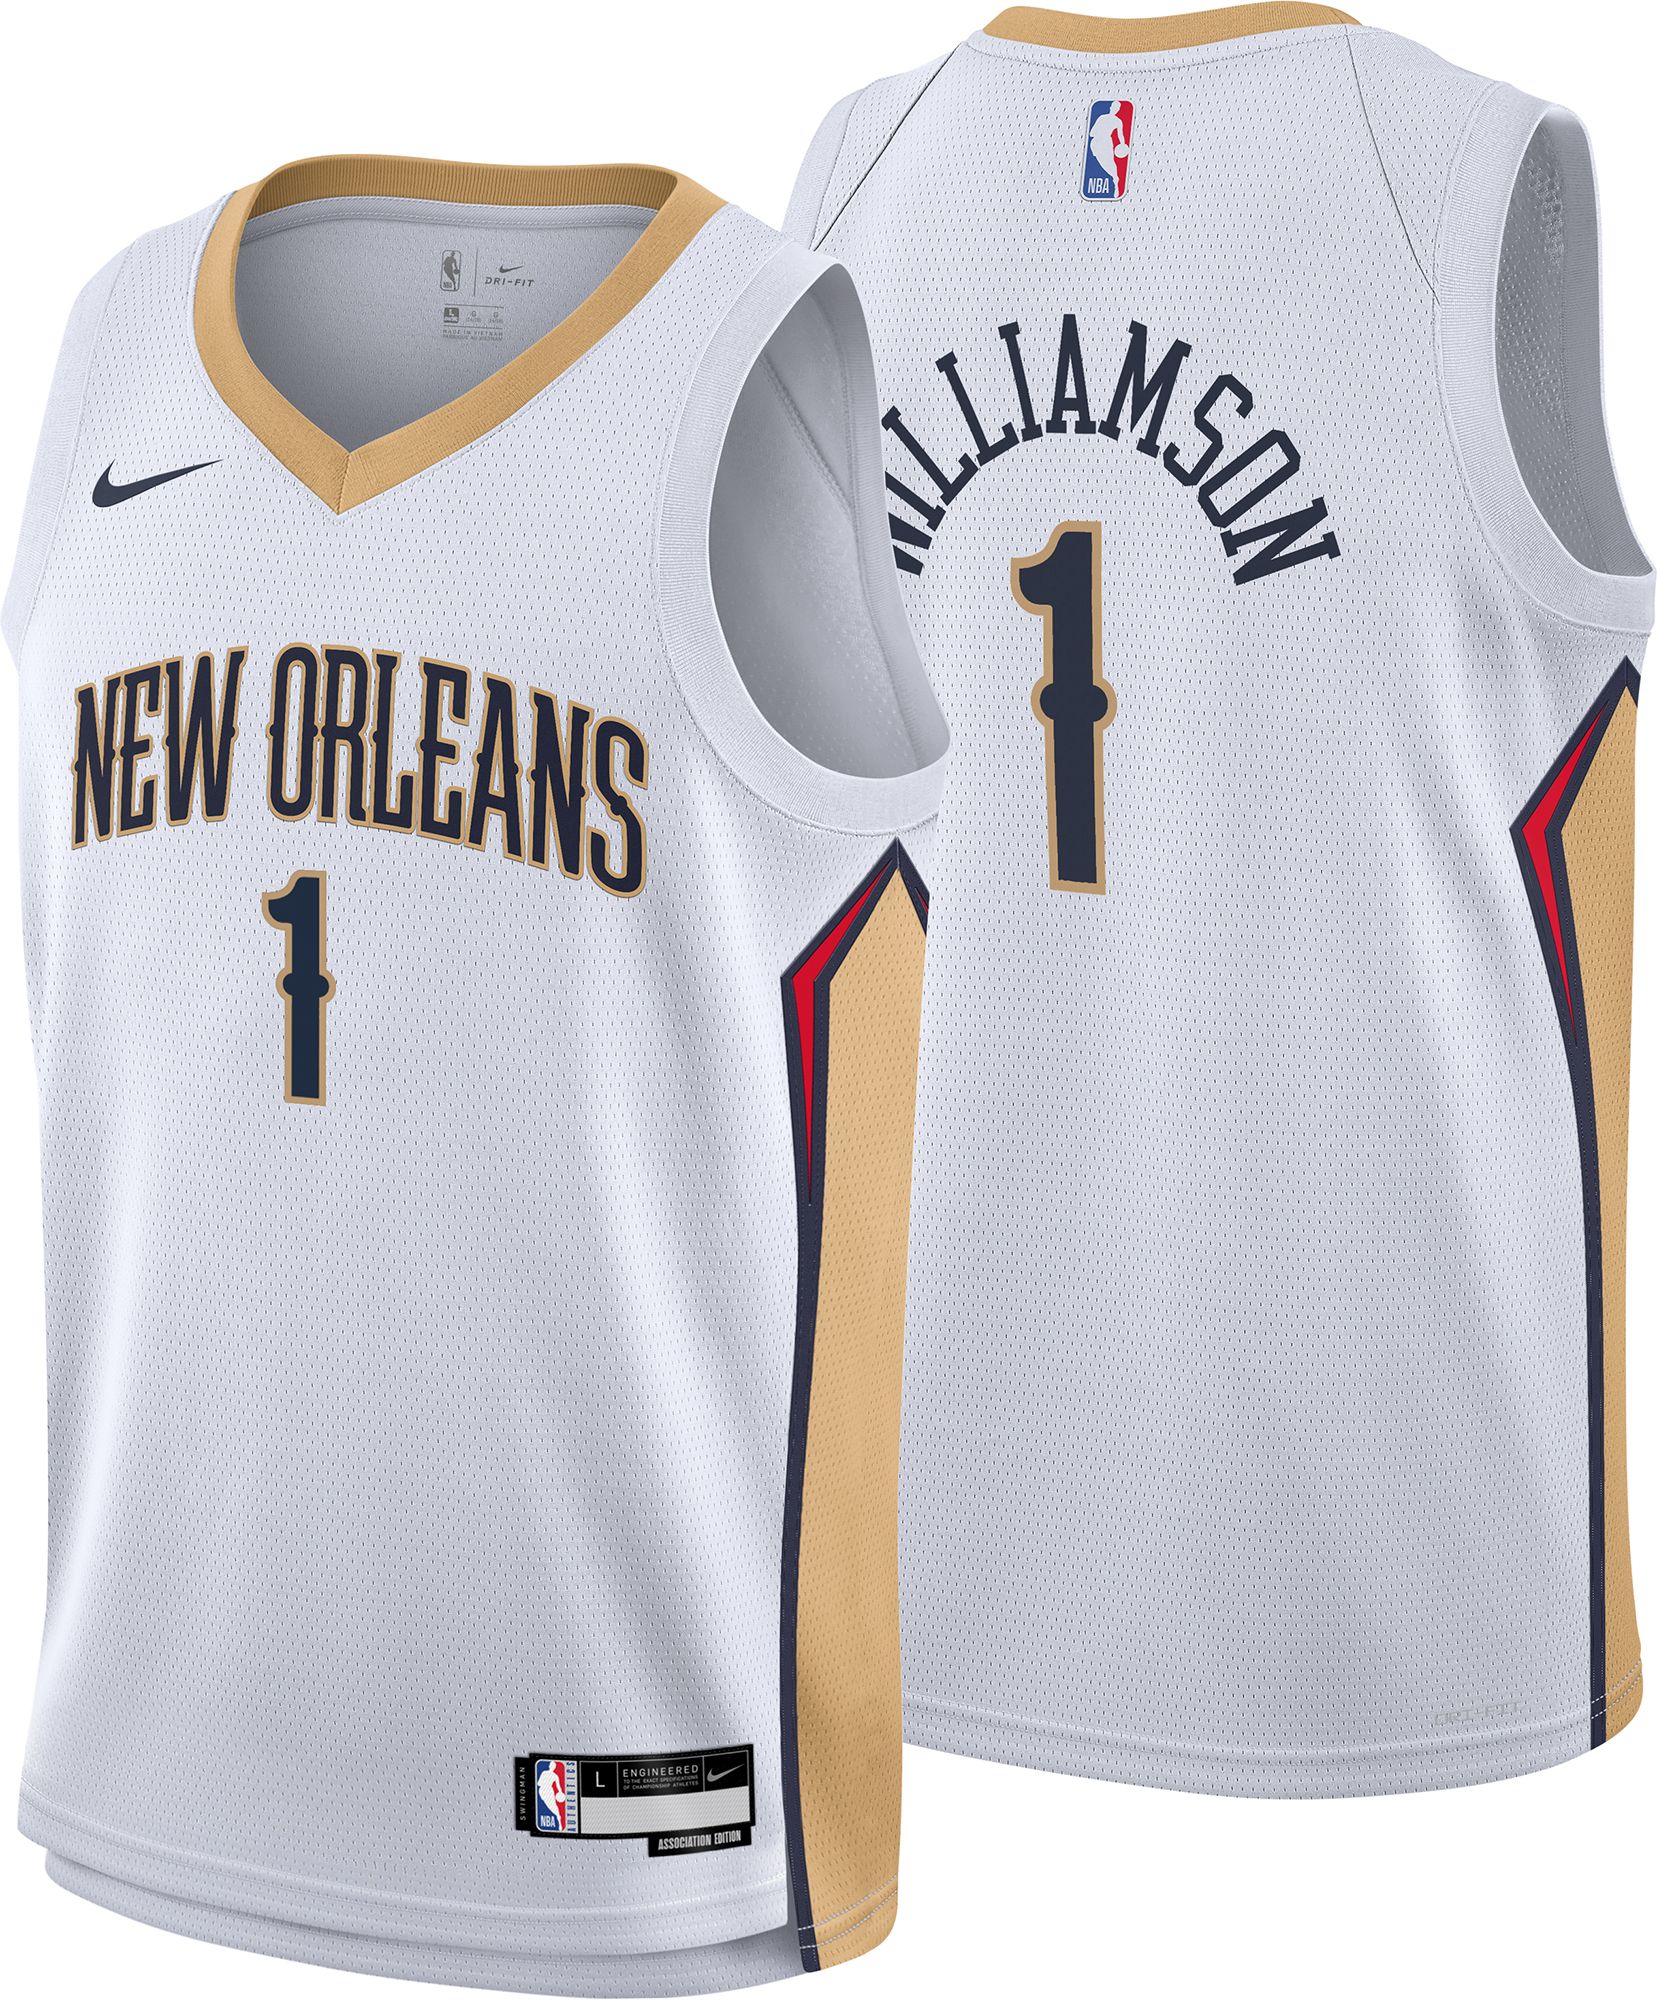 Zion Williamson Pelicans player edition jersey